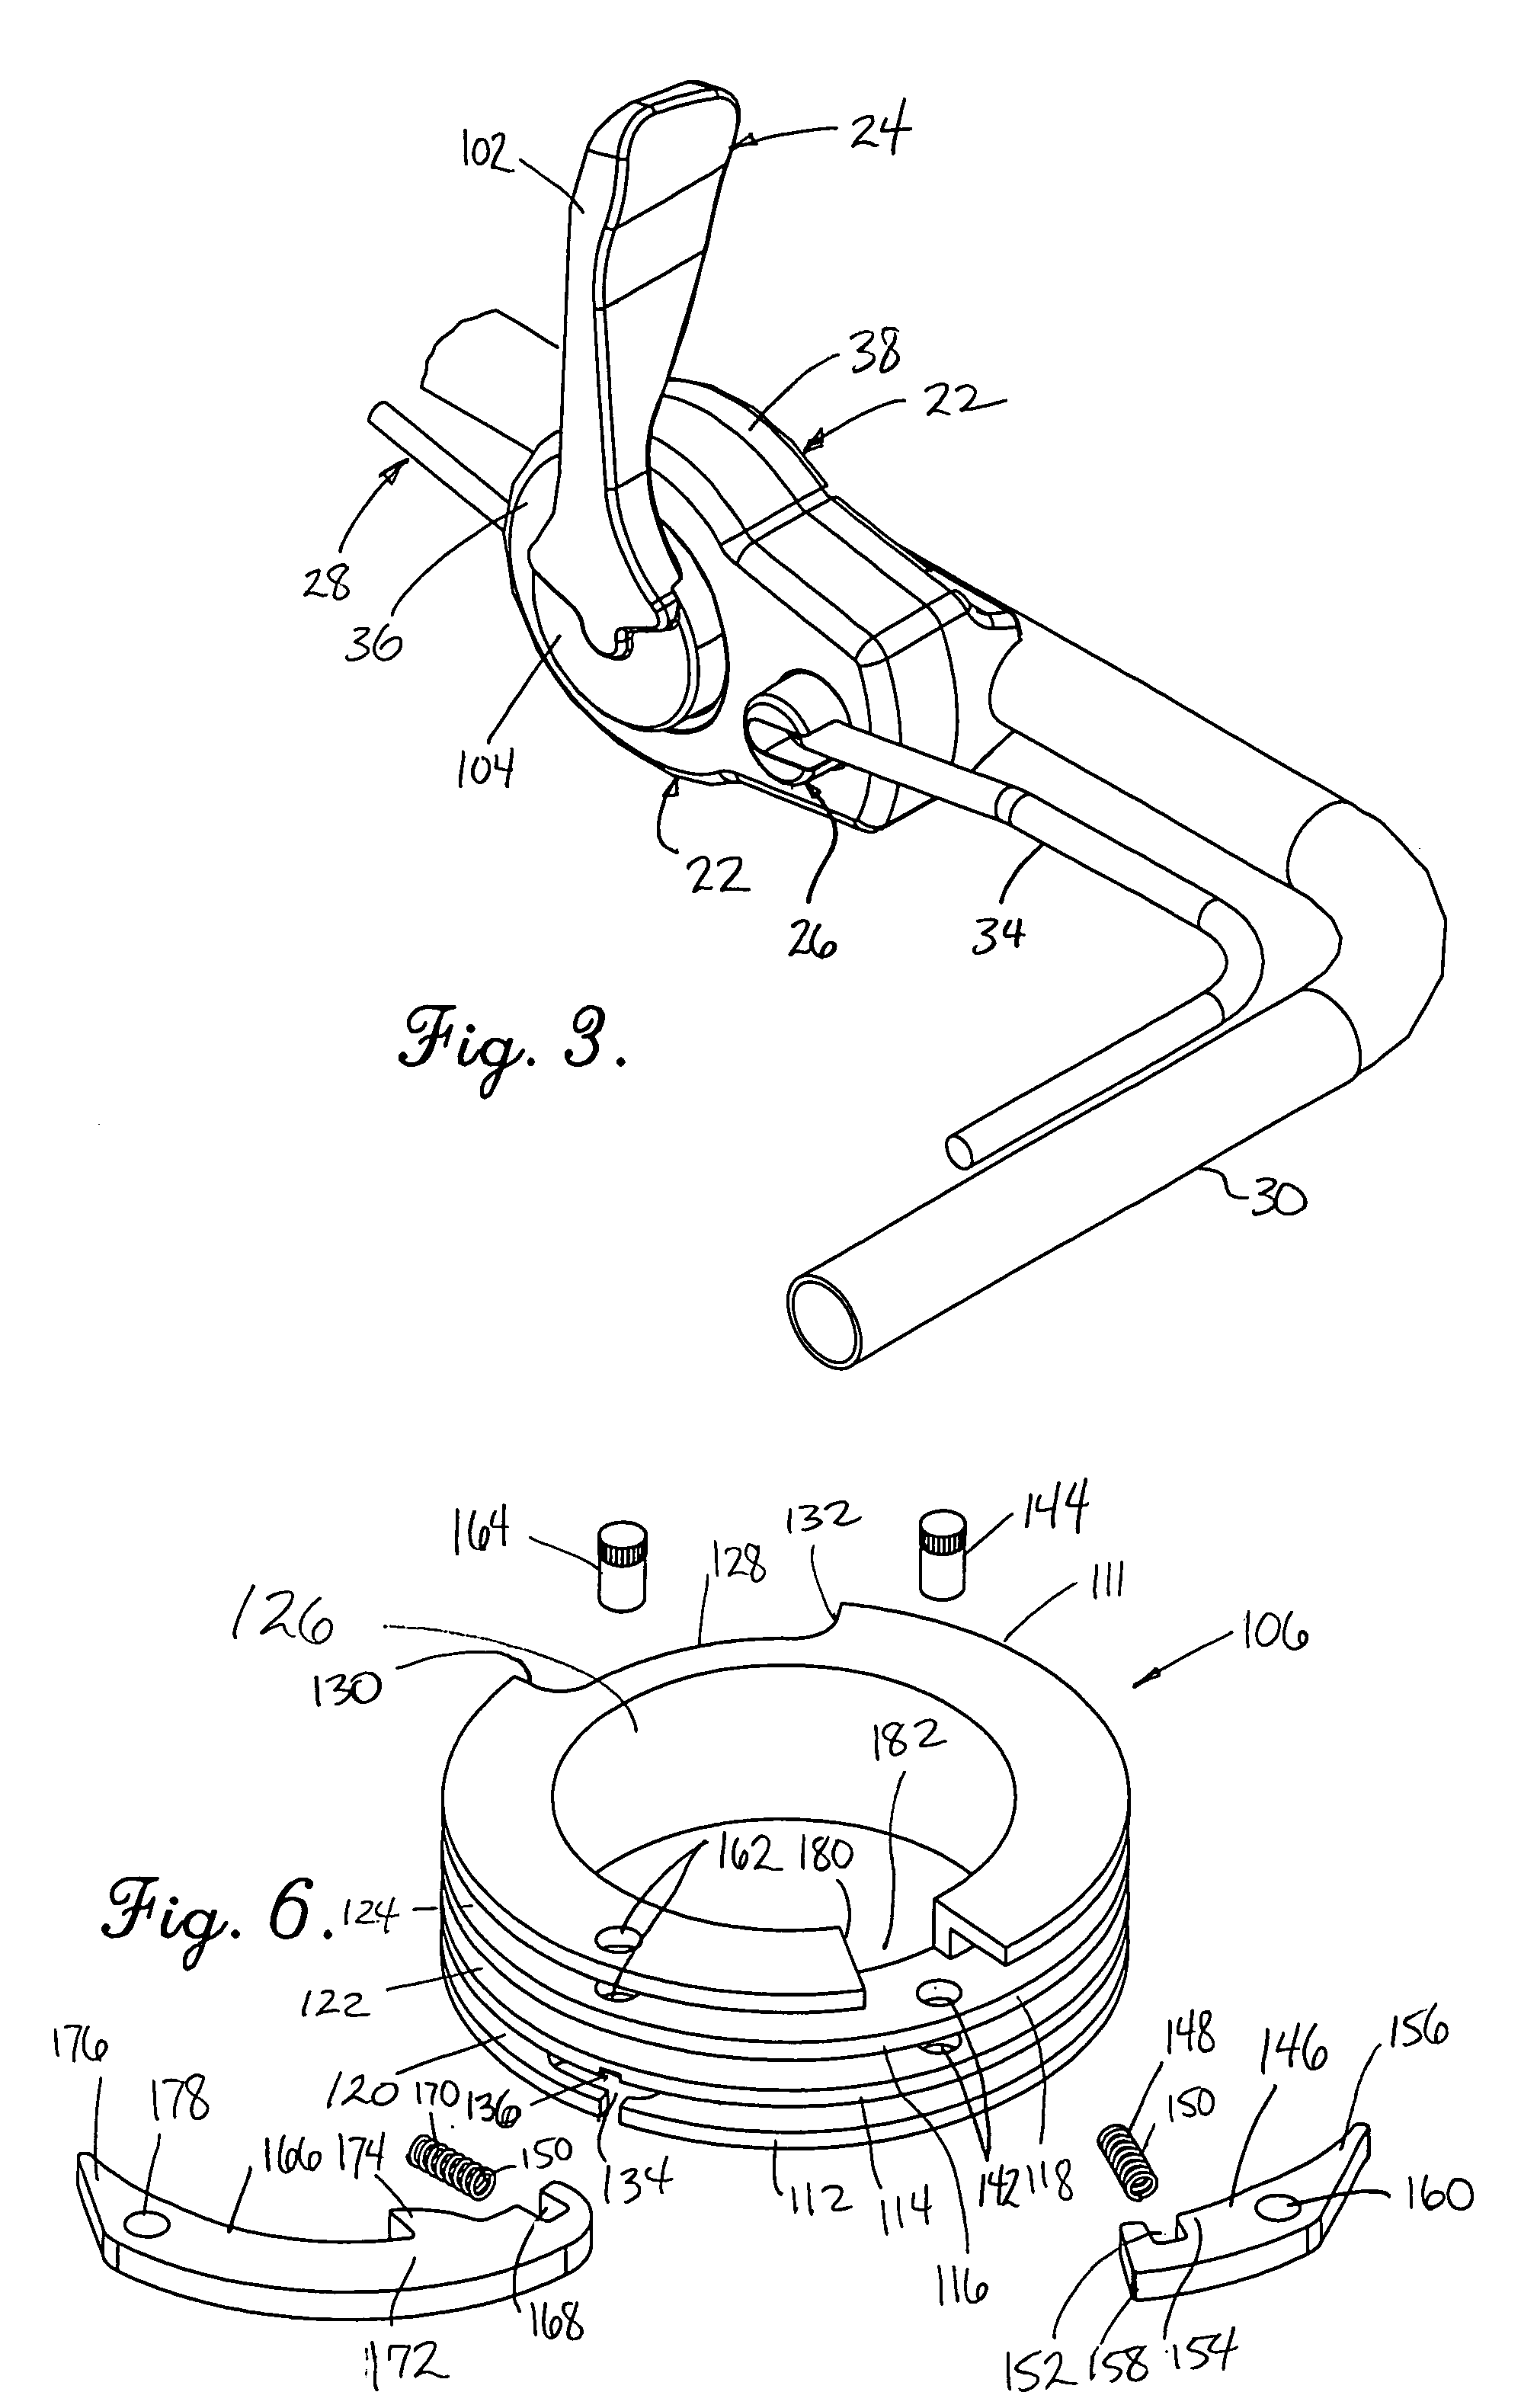 Apparatus for two-motion cable engagement